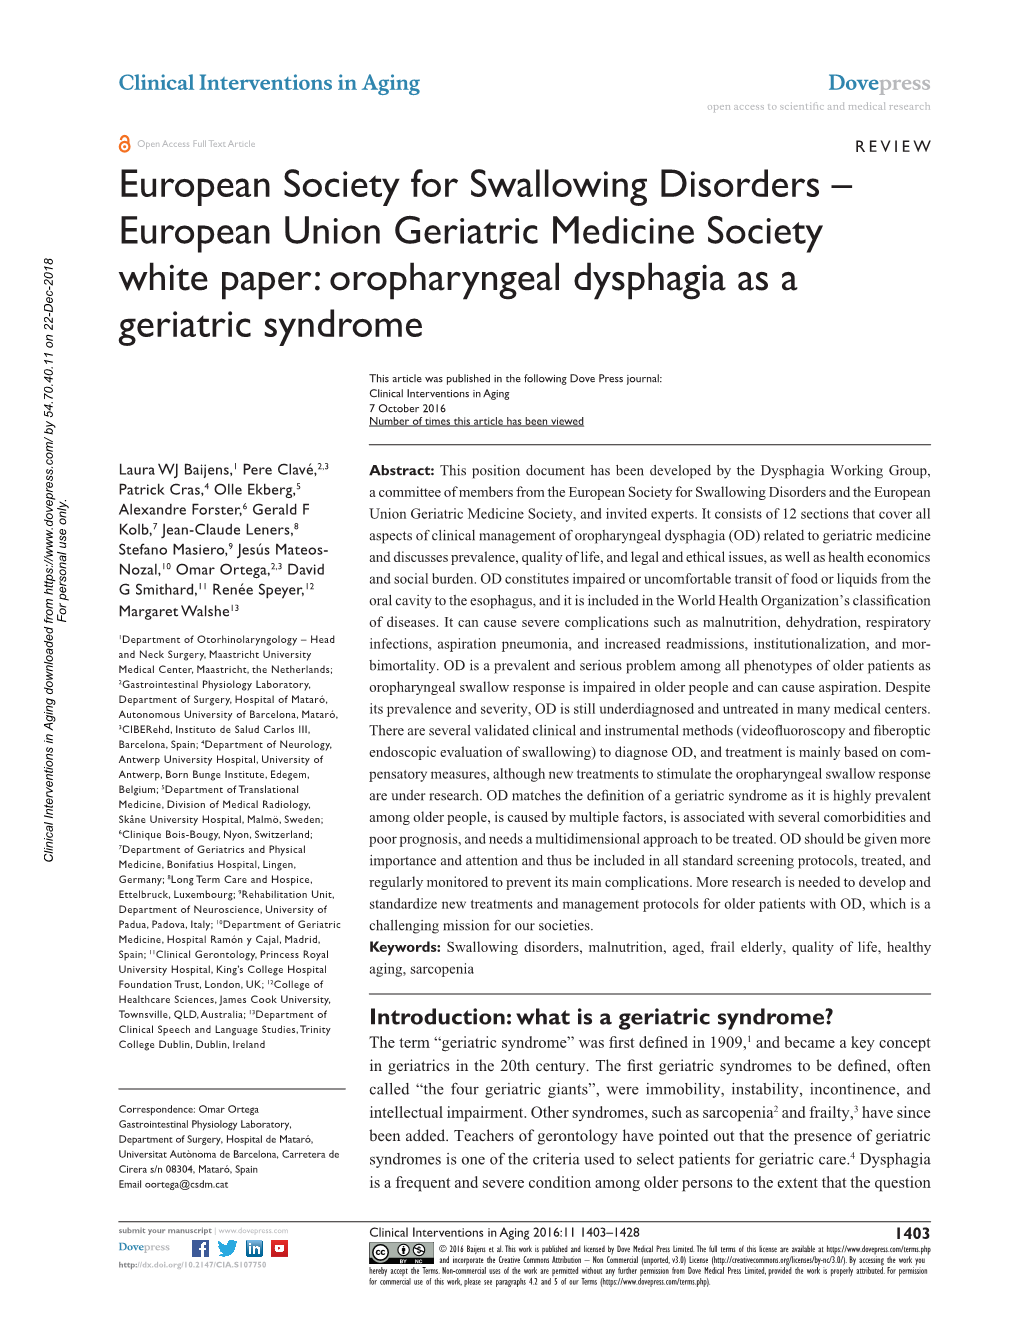 Oropharyngeal Dysphagia As a Geriatric Syndrome Open Access to Scientific and Medical Research DOI